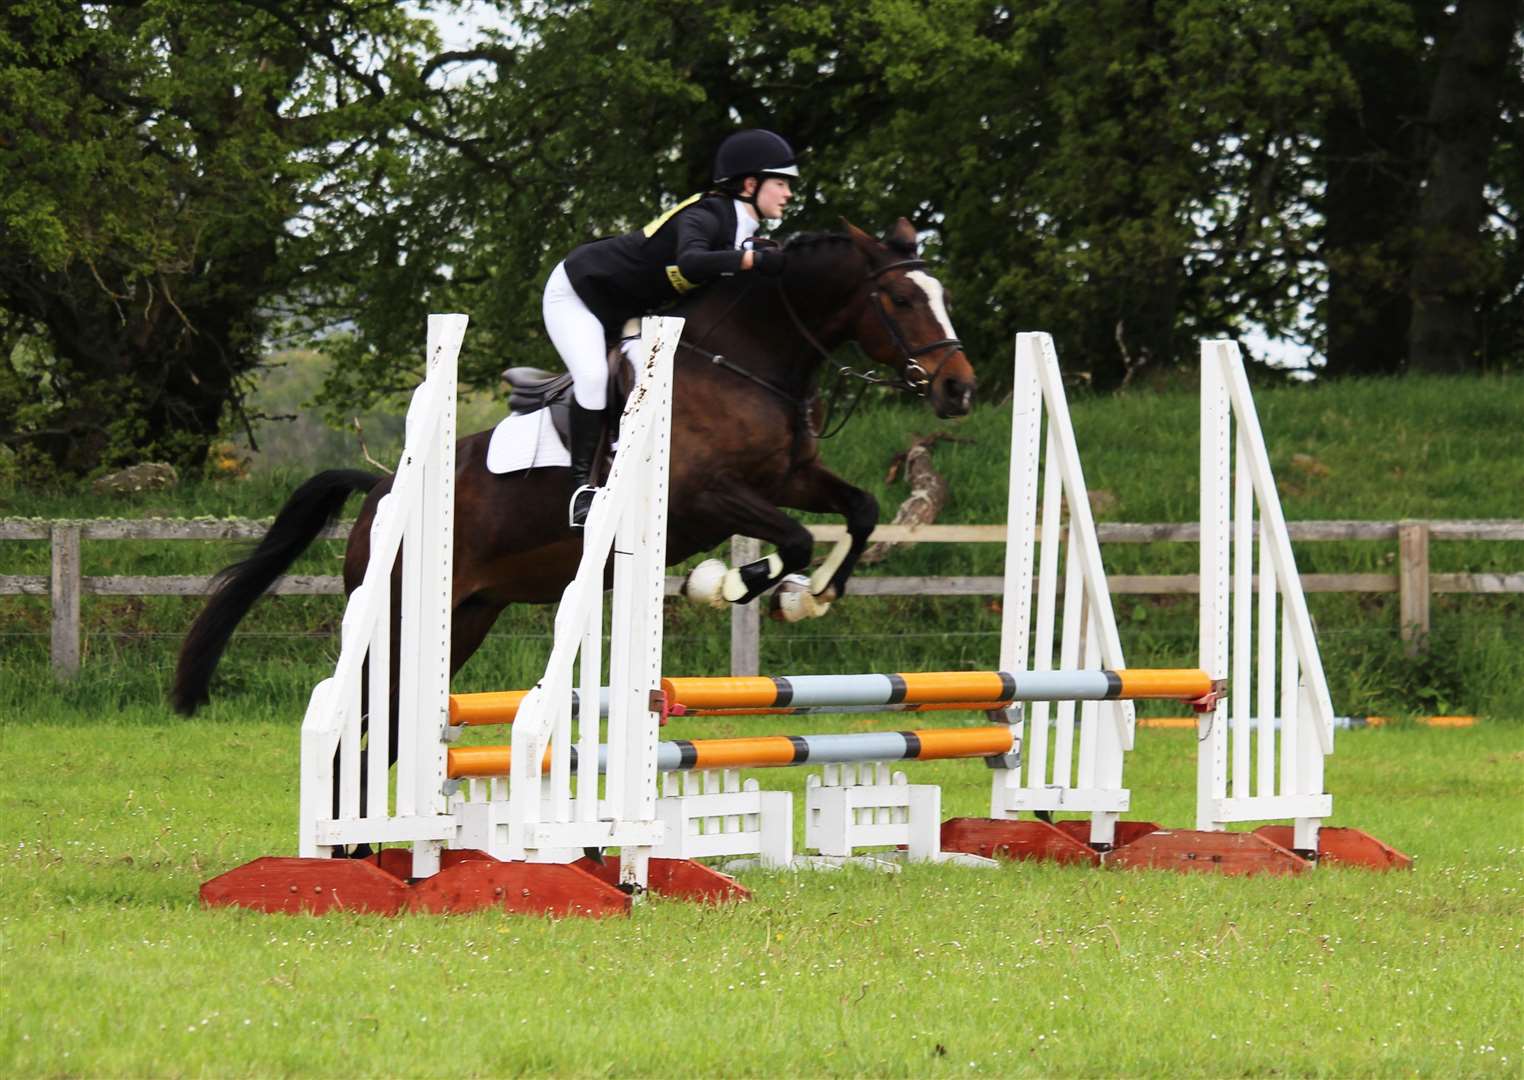 Emma Mackay and Laucors Boadicea on their way to securing a clear round in the showjumping for the BE(80) regional final section at Scotsburn.